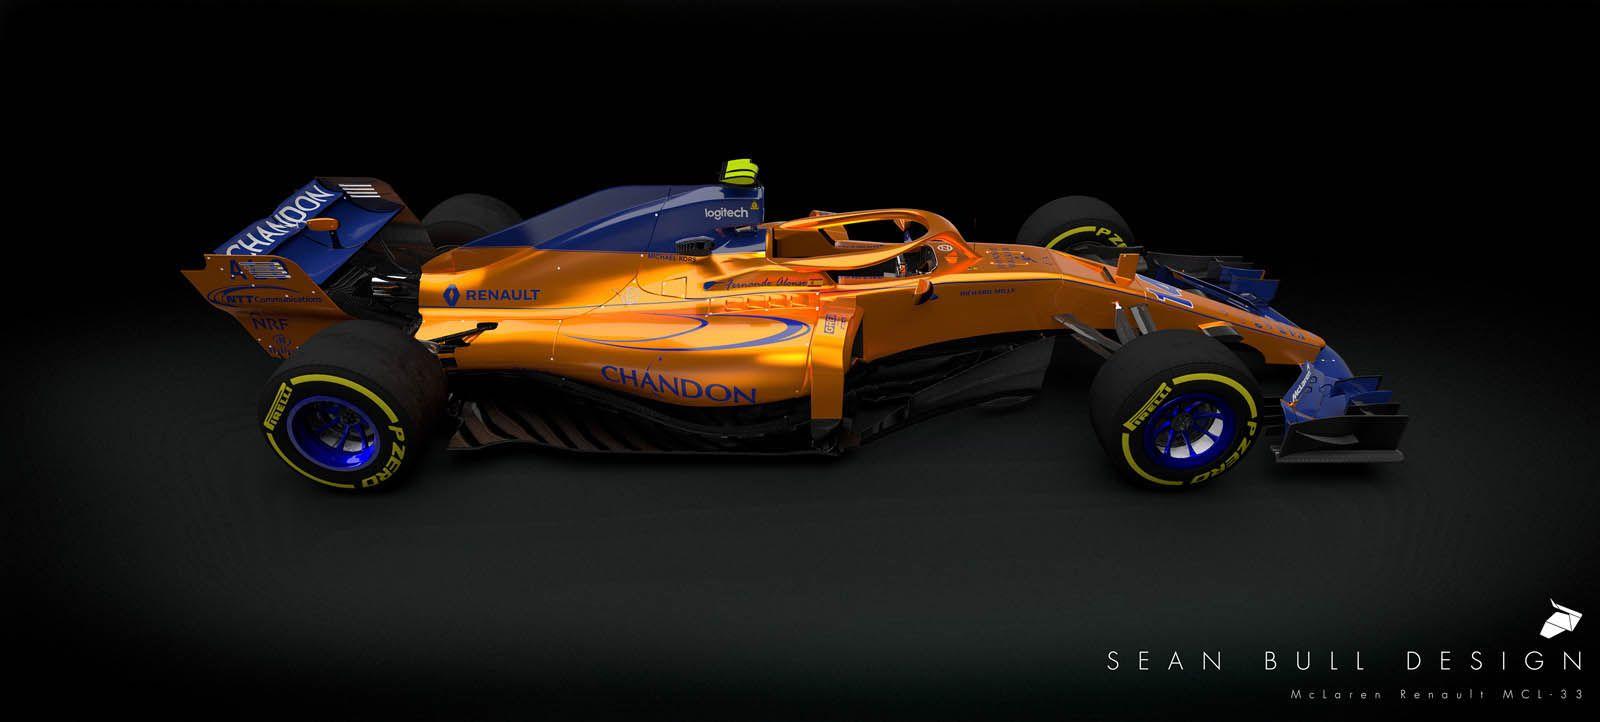 Maybe The 2018 McLaren Renault MCL33 Will Actually Win Something